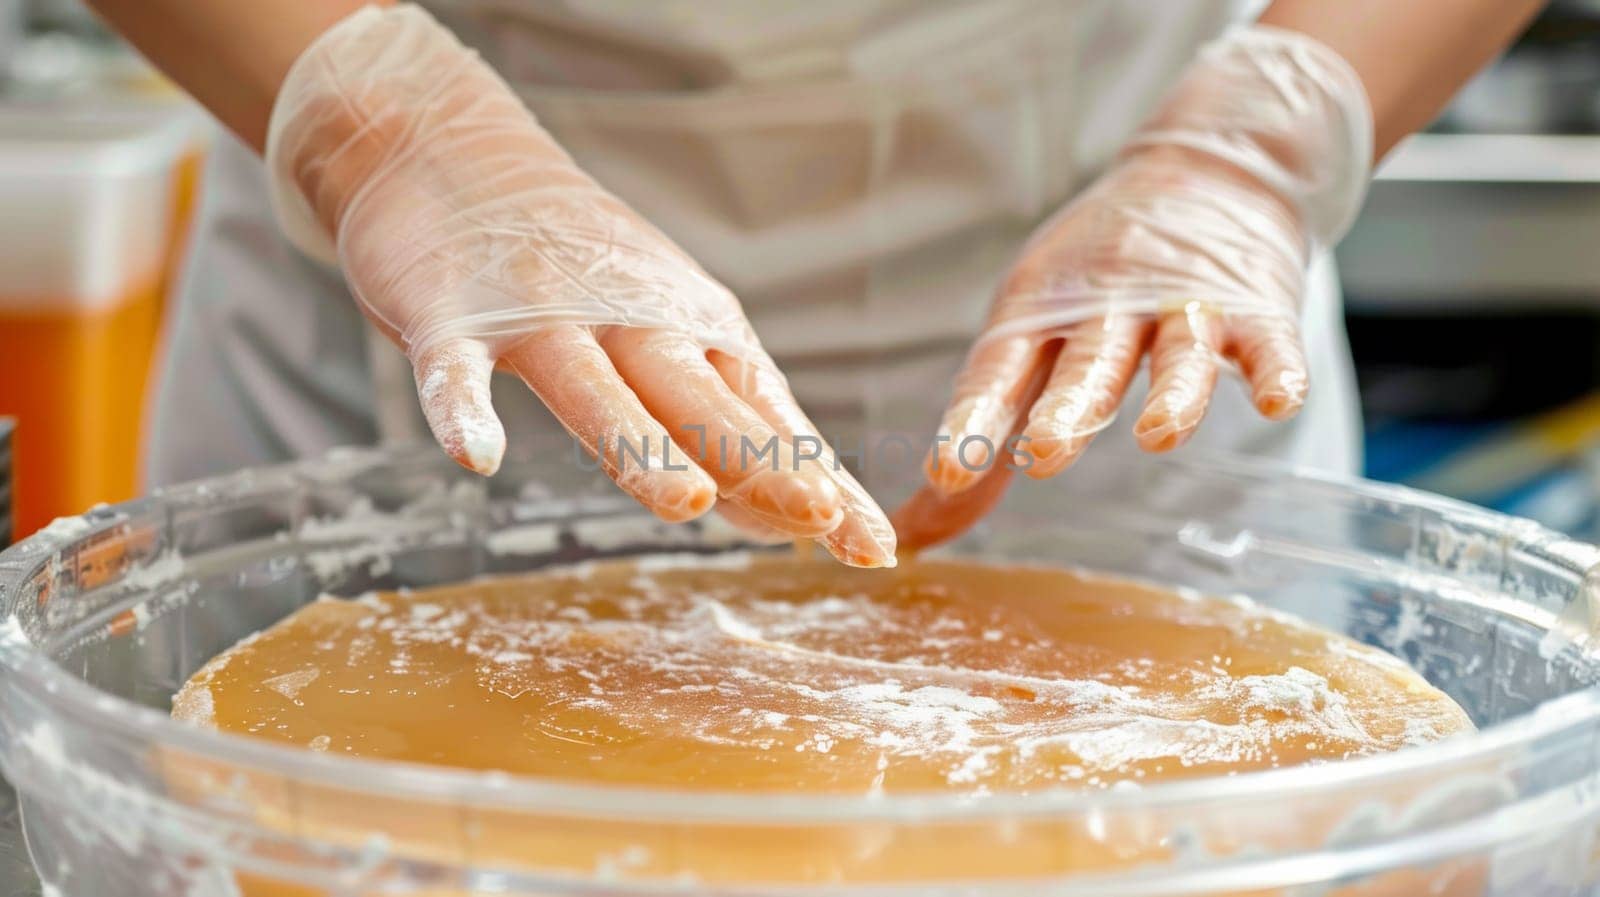 A person in white gloves is preparing food for consumption